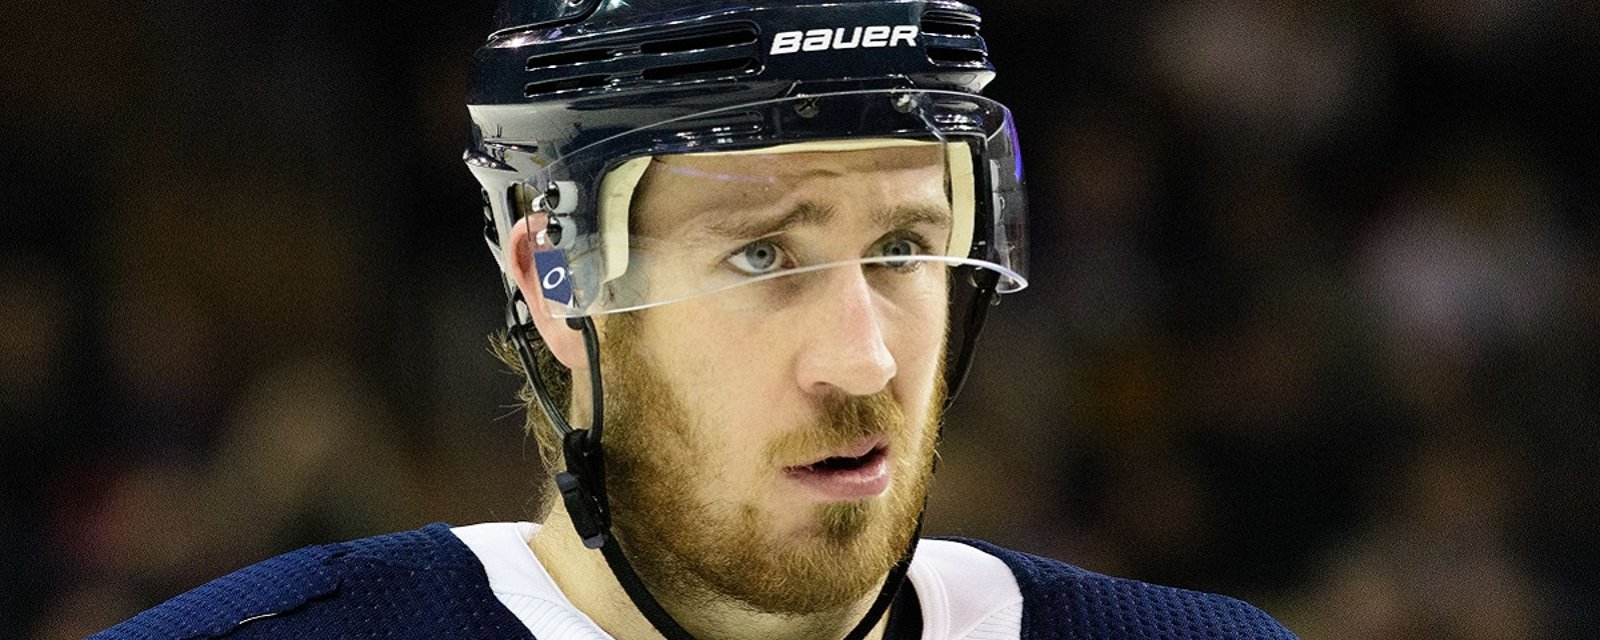 Rumor: Kevin Hayes will not sign with the Flyers, has “mutual interest” with another team.